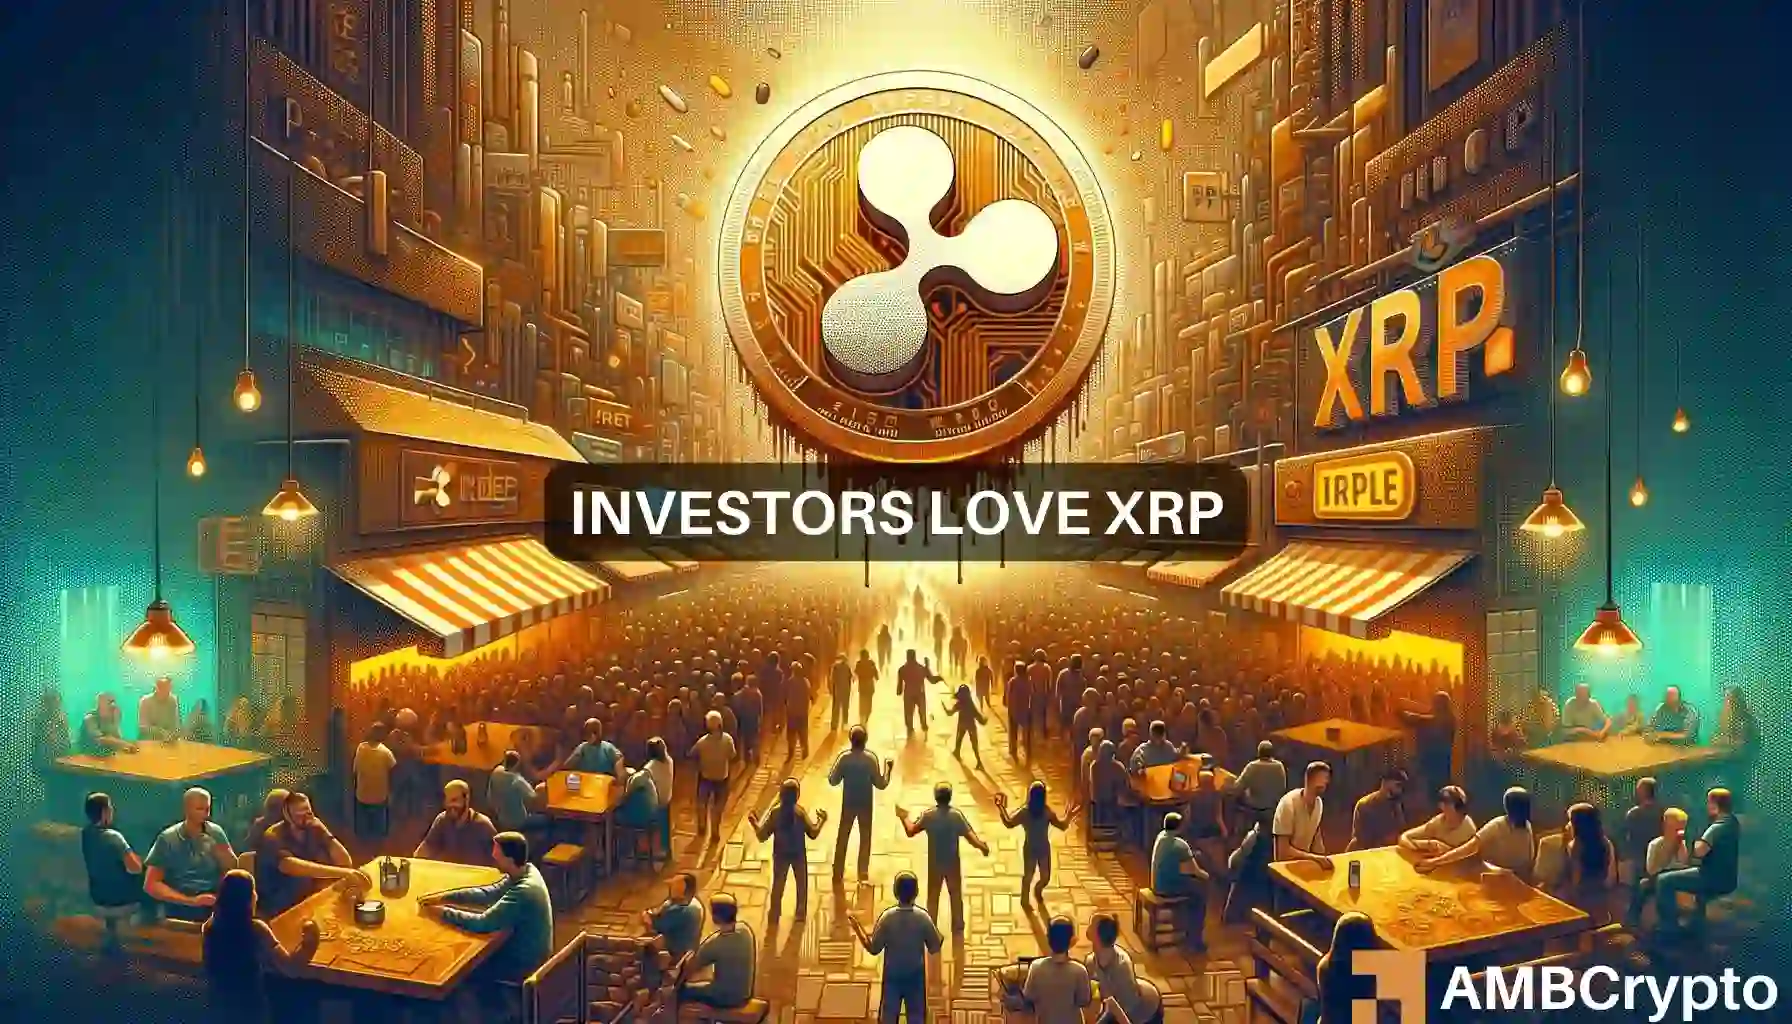 XRP gains 100K holders in June: What does it mean for prices?